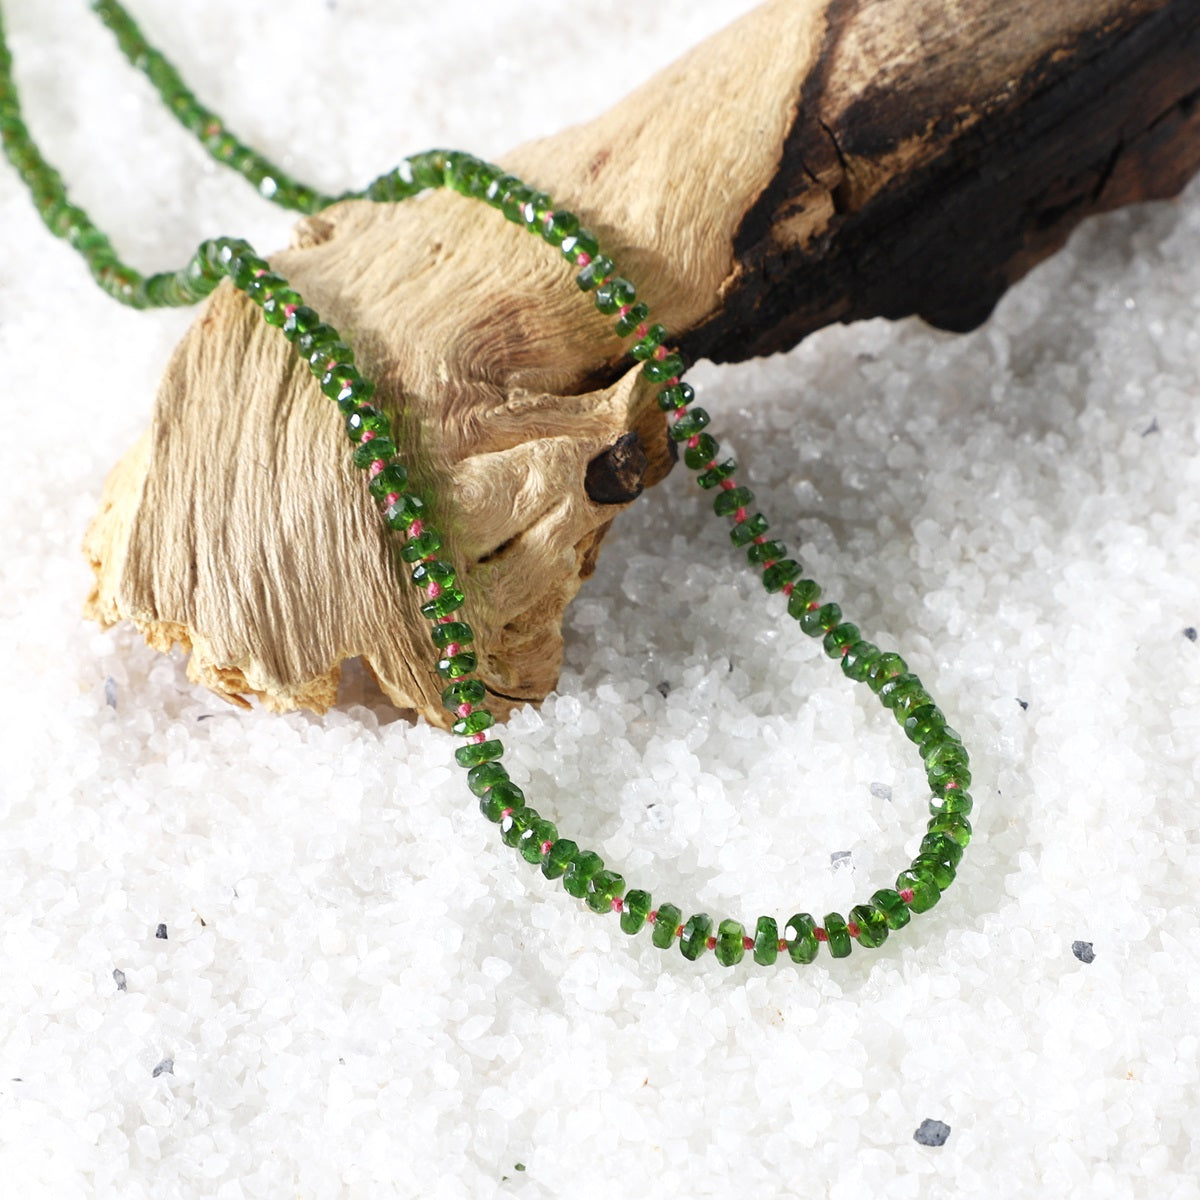 Chrome Diopside beads promoting emotional healing and renewal